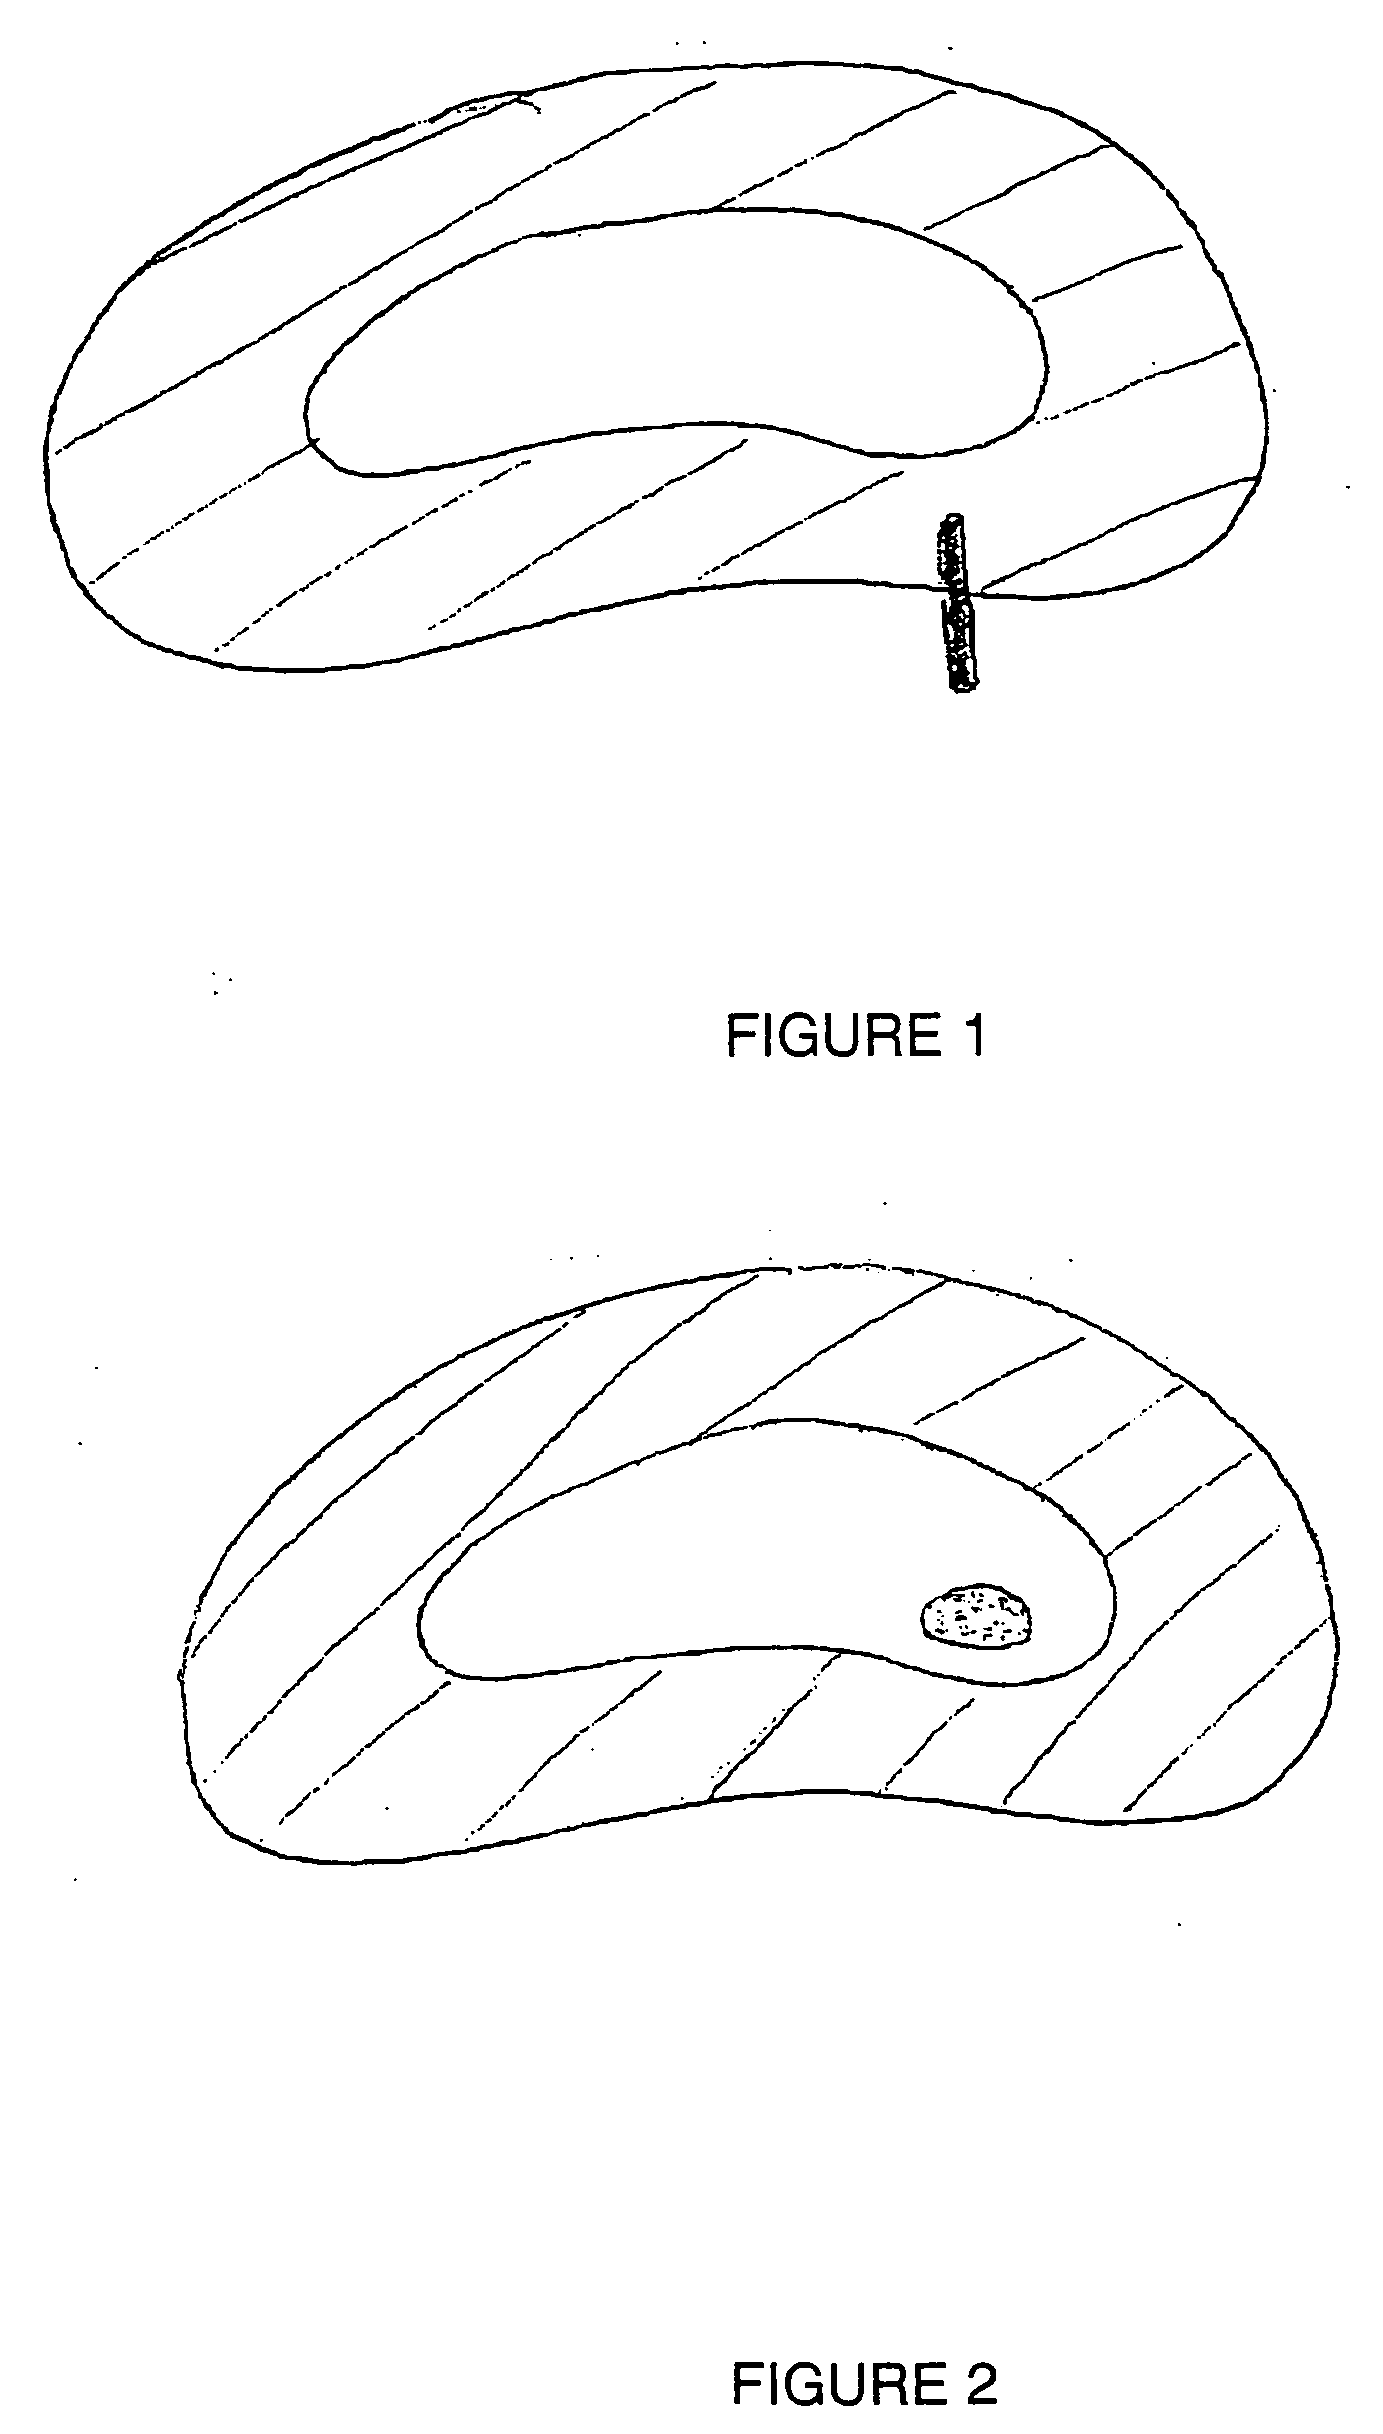 Disc augmentation using materials that expand in situ